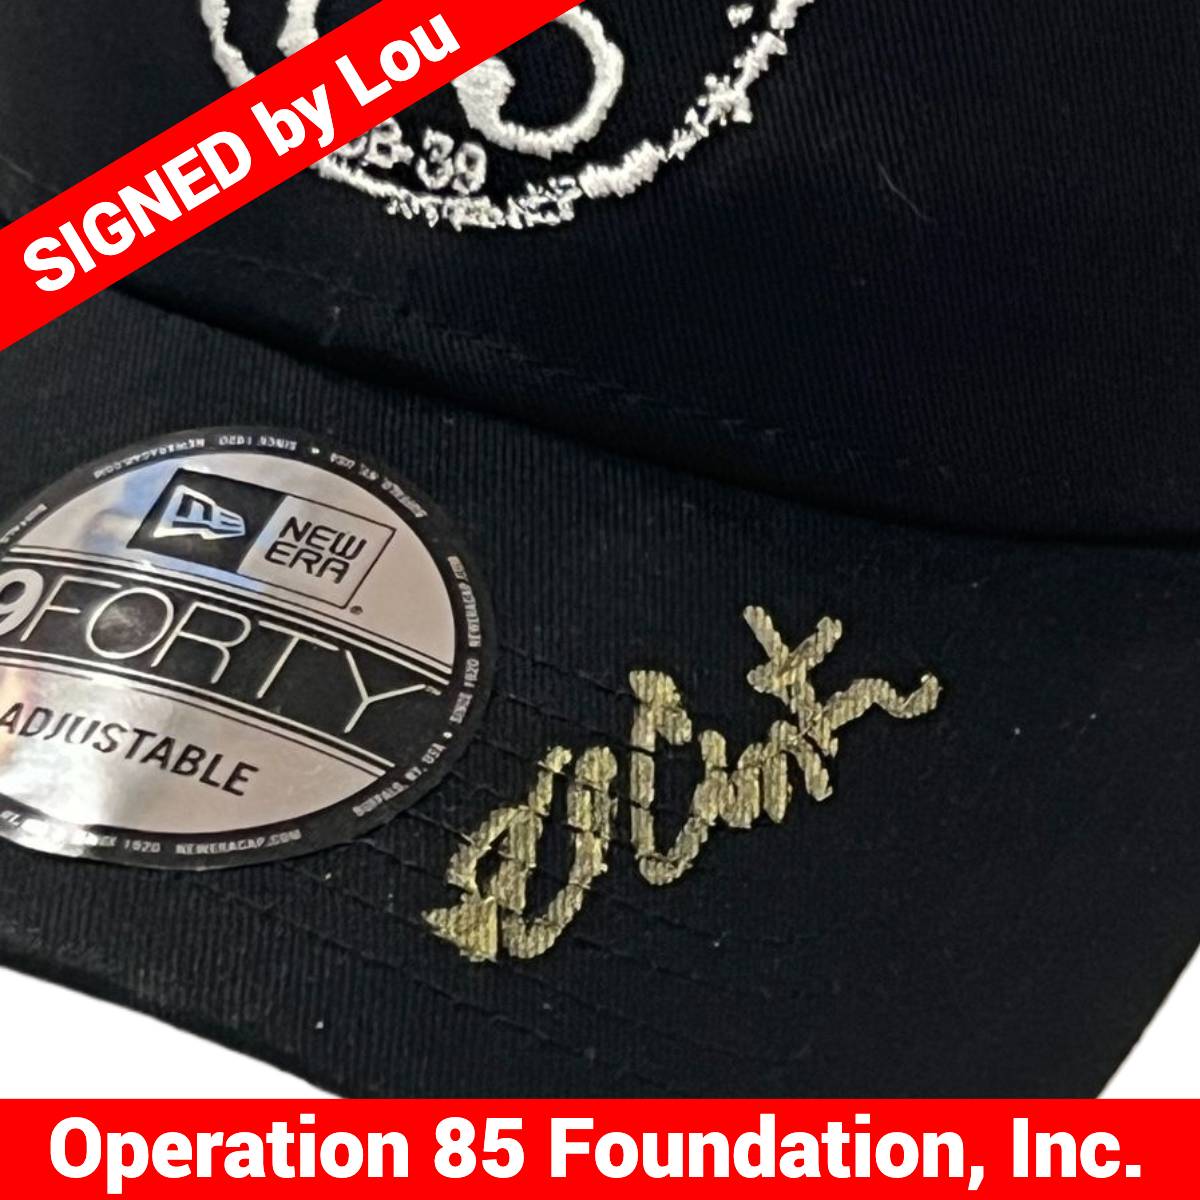 Lou Conter Sign hat